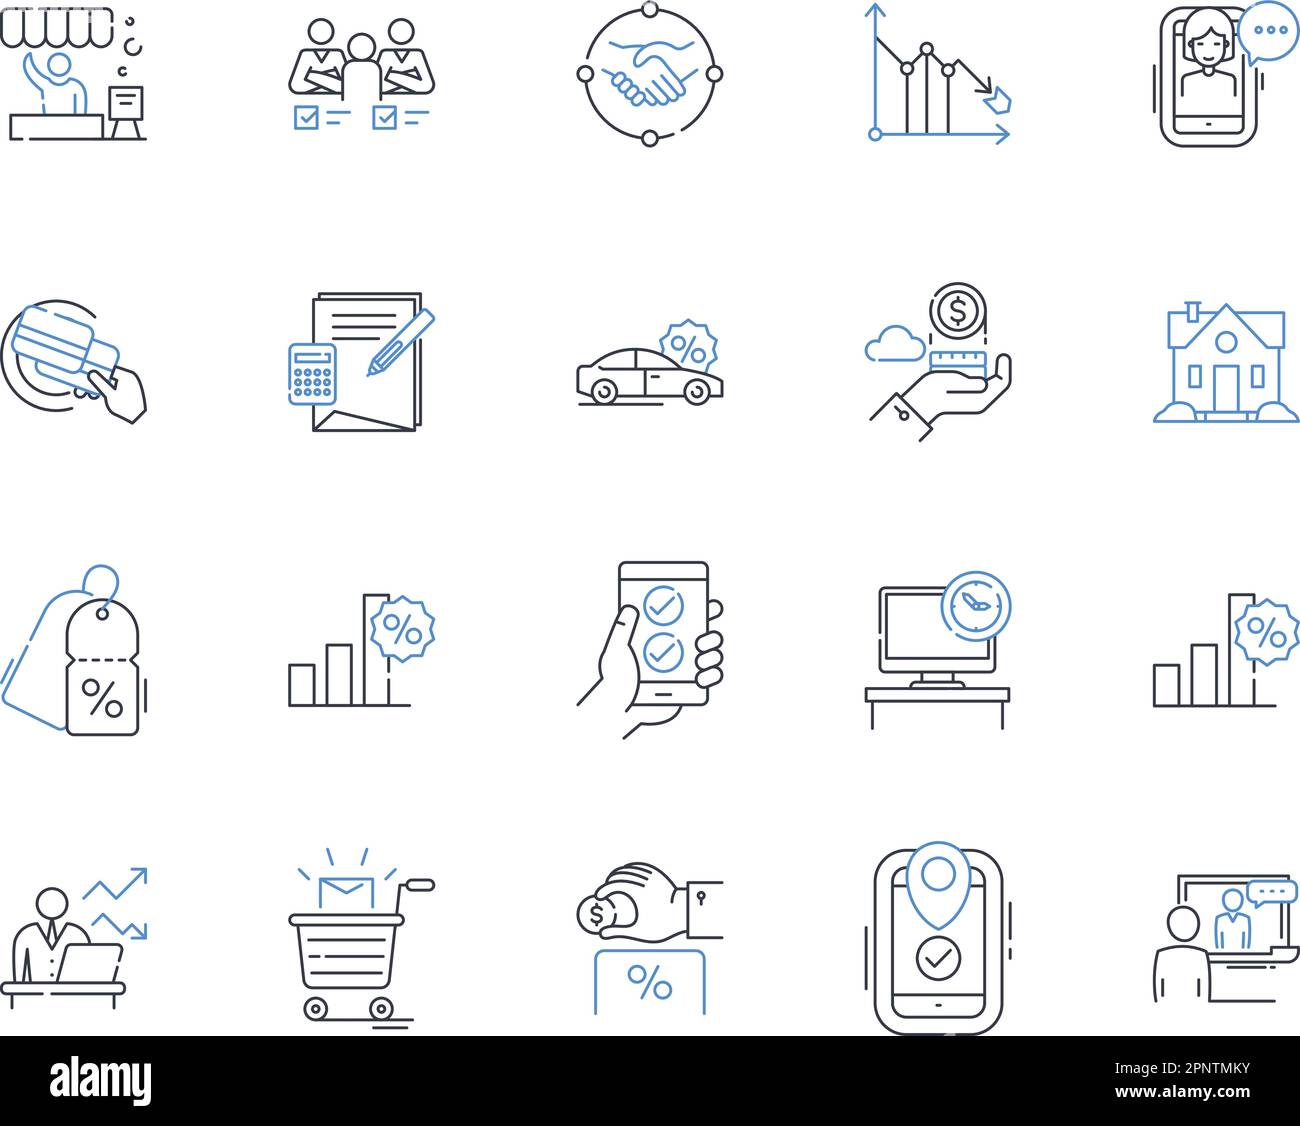 Credit line icons collection. Loan, Interest, Balance, Score, History, Debt, Report vector and linear illustration. Limit,Card,Application outline Stock Vector